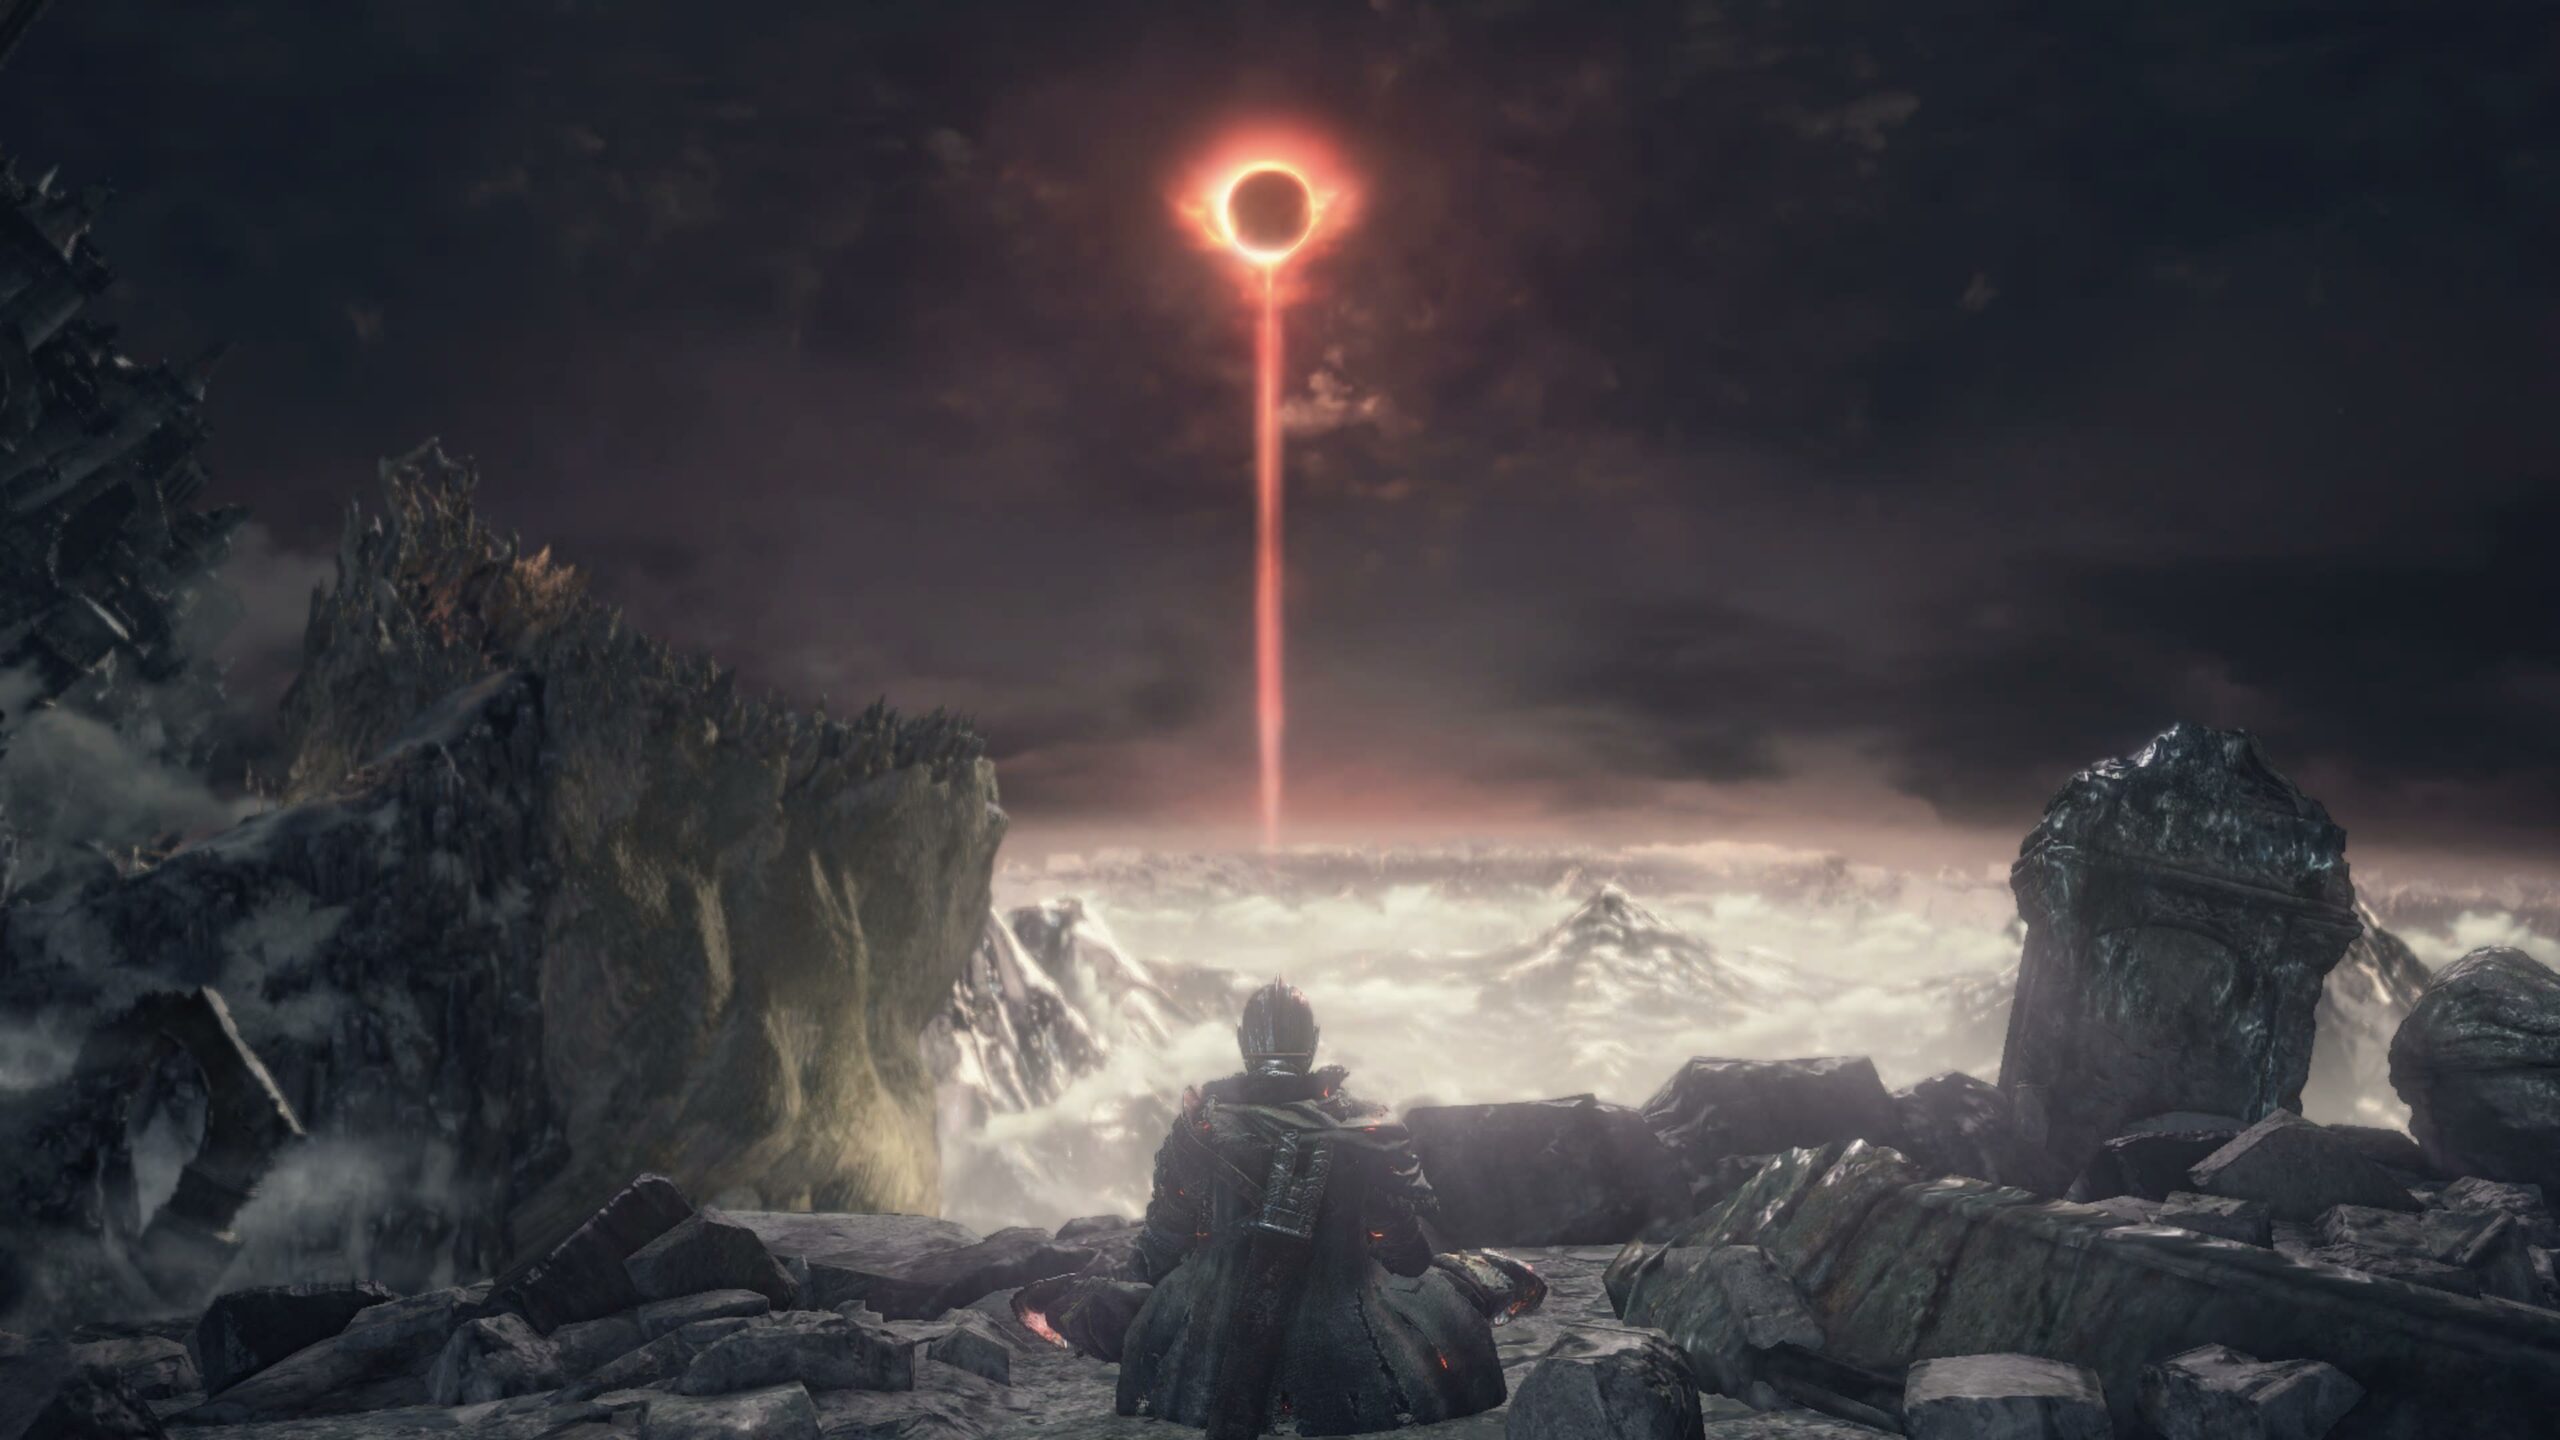 Do you agree Demon Souls is the hardest game in the whole Dark souls  franchise ? I've beaten Sekiro twice, DS3 - 5 times, Bloodborne - 7 times,  but I can do